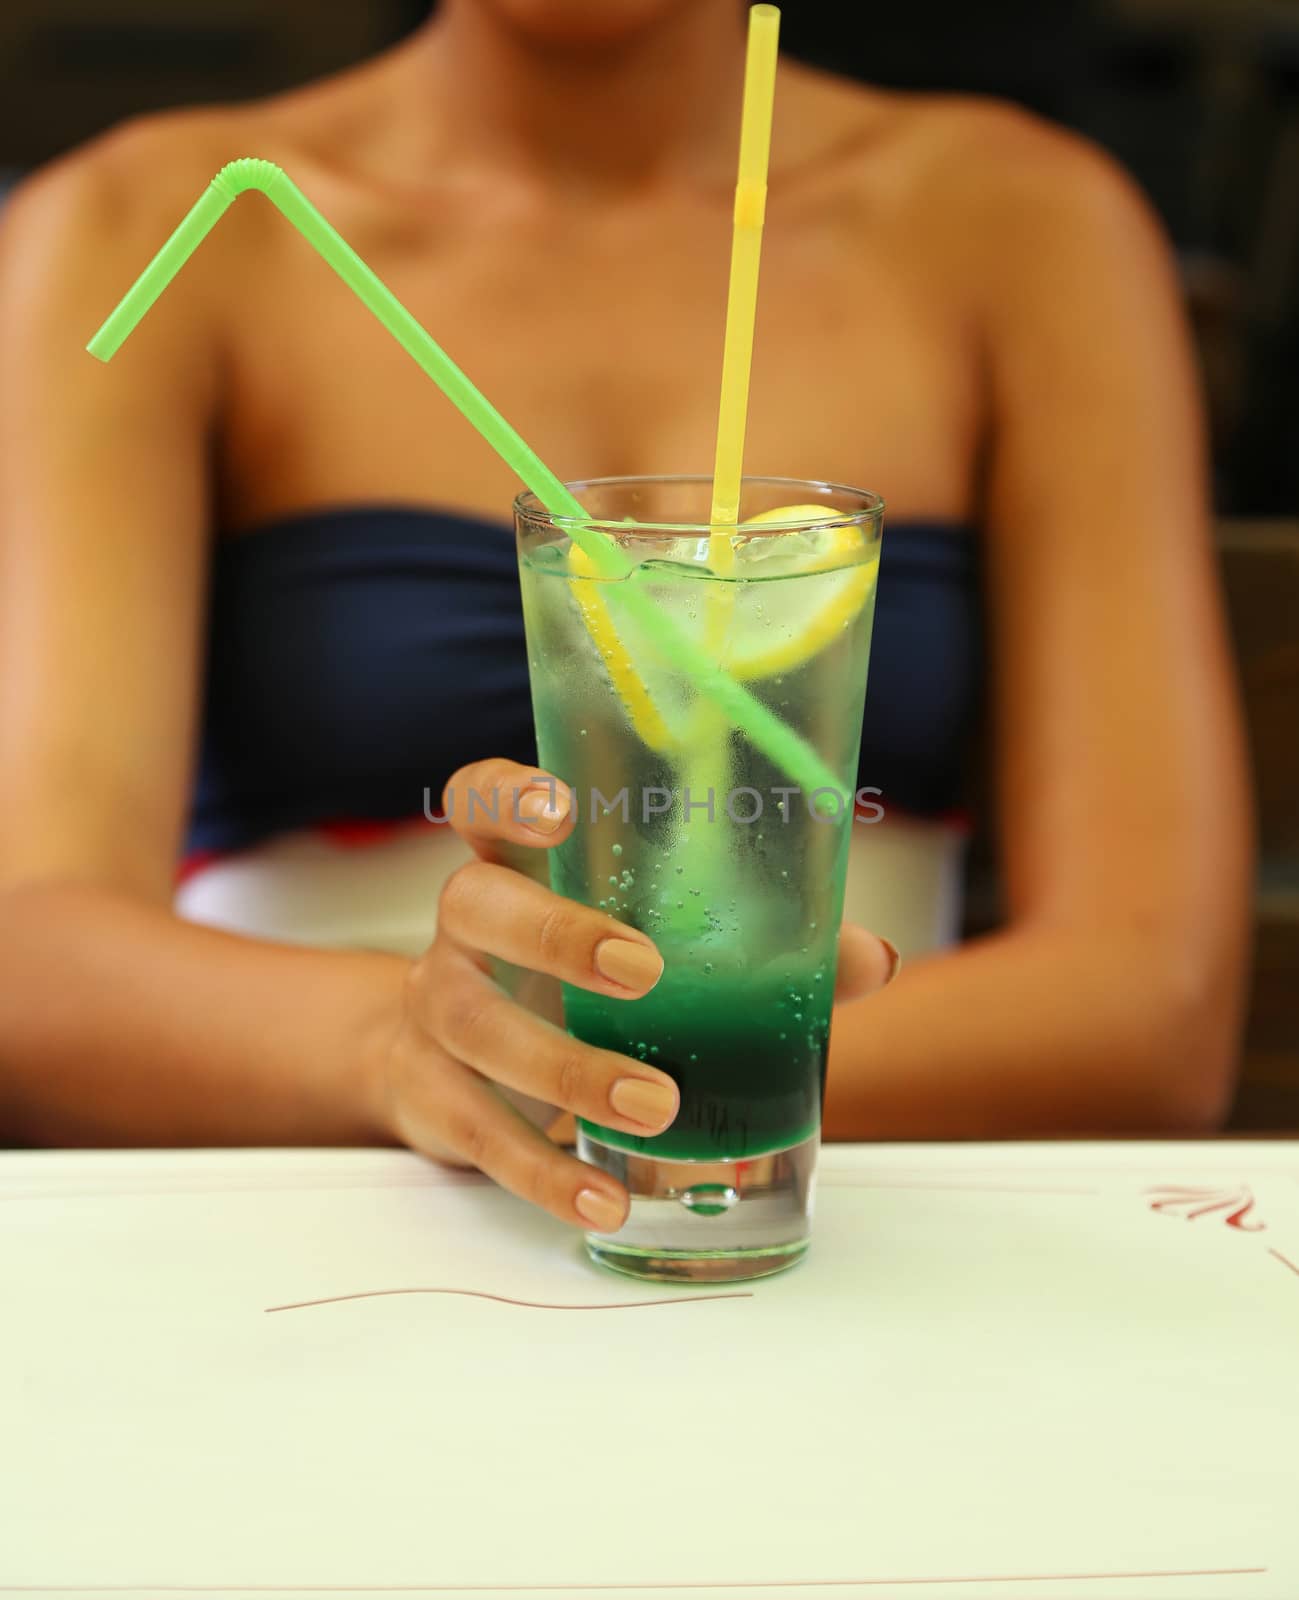 Green alcoholic cocktail in a tall glass against woman trunk